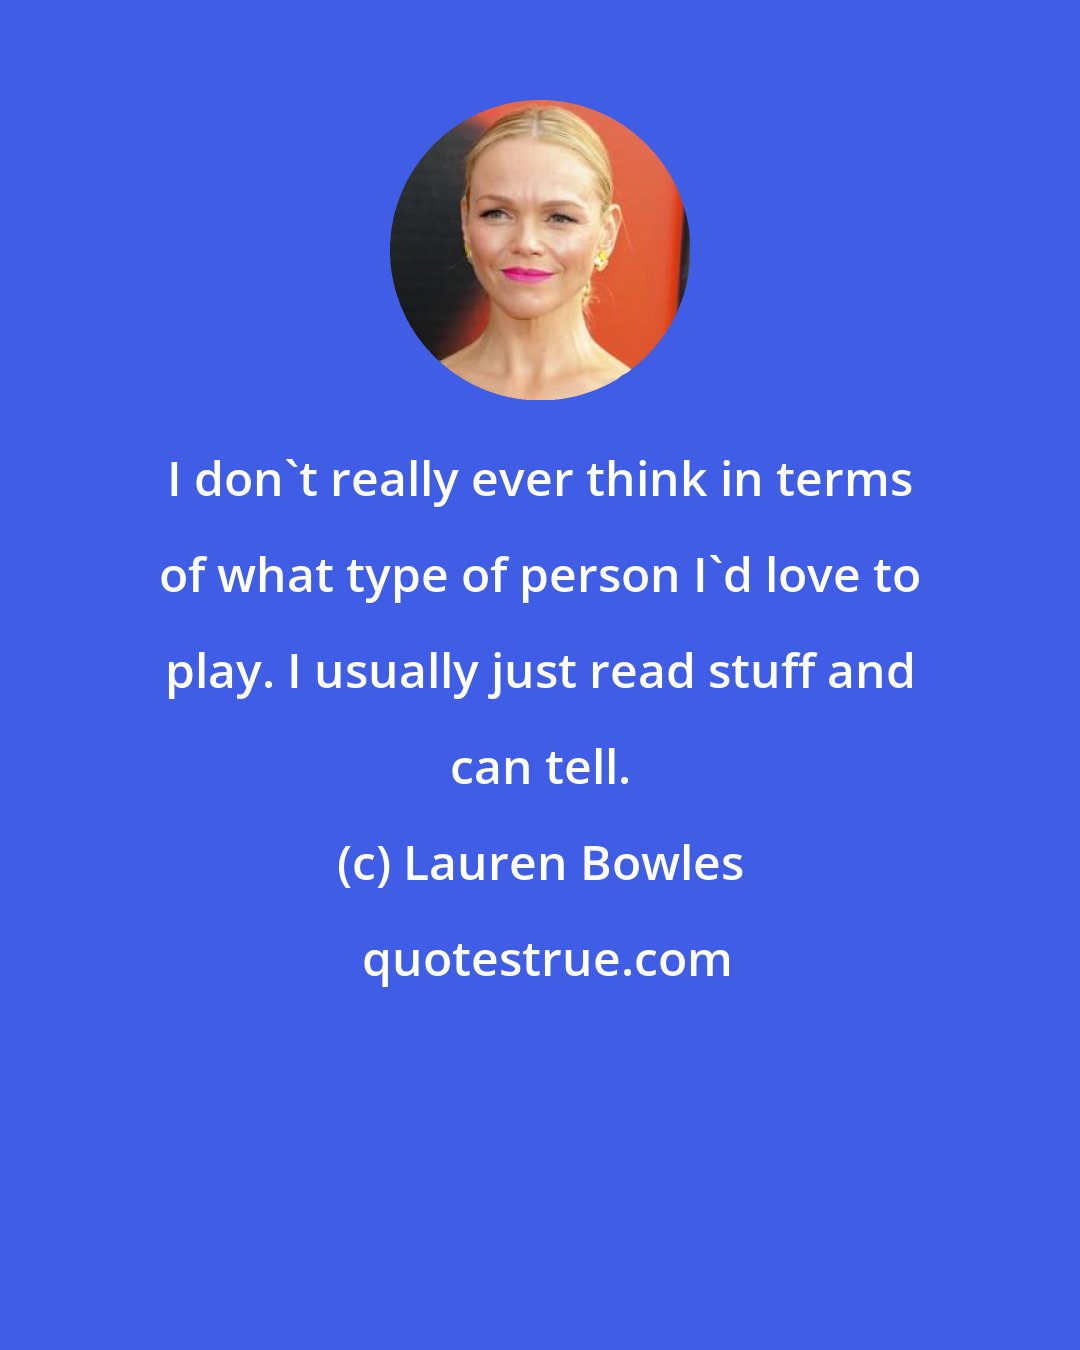 Lauren Bowles: I don't really ever think in terms of what type of person I'd love to play. I usually just read stuff and can tell.